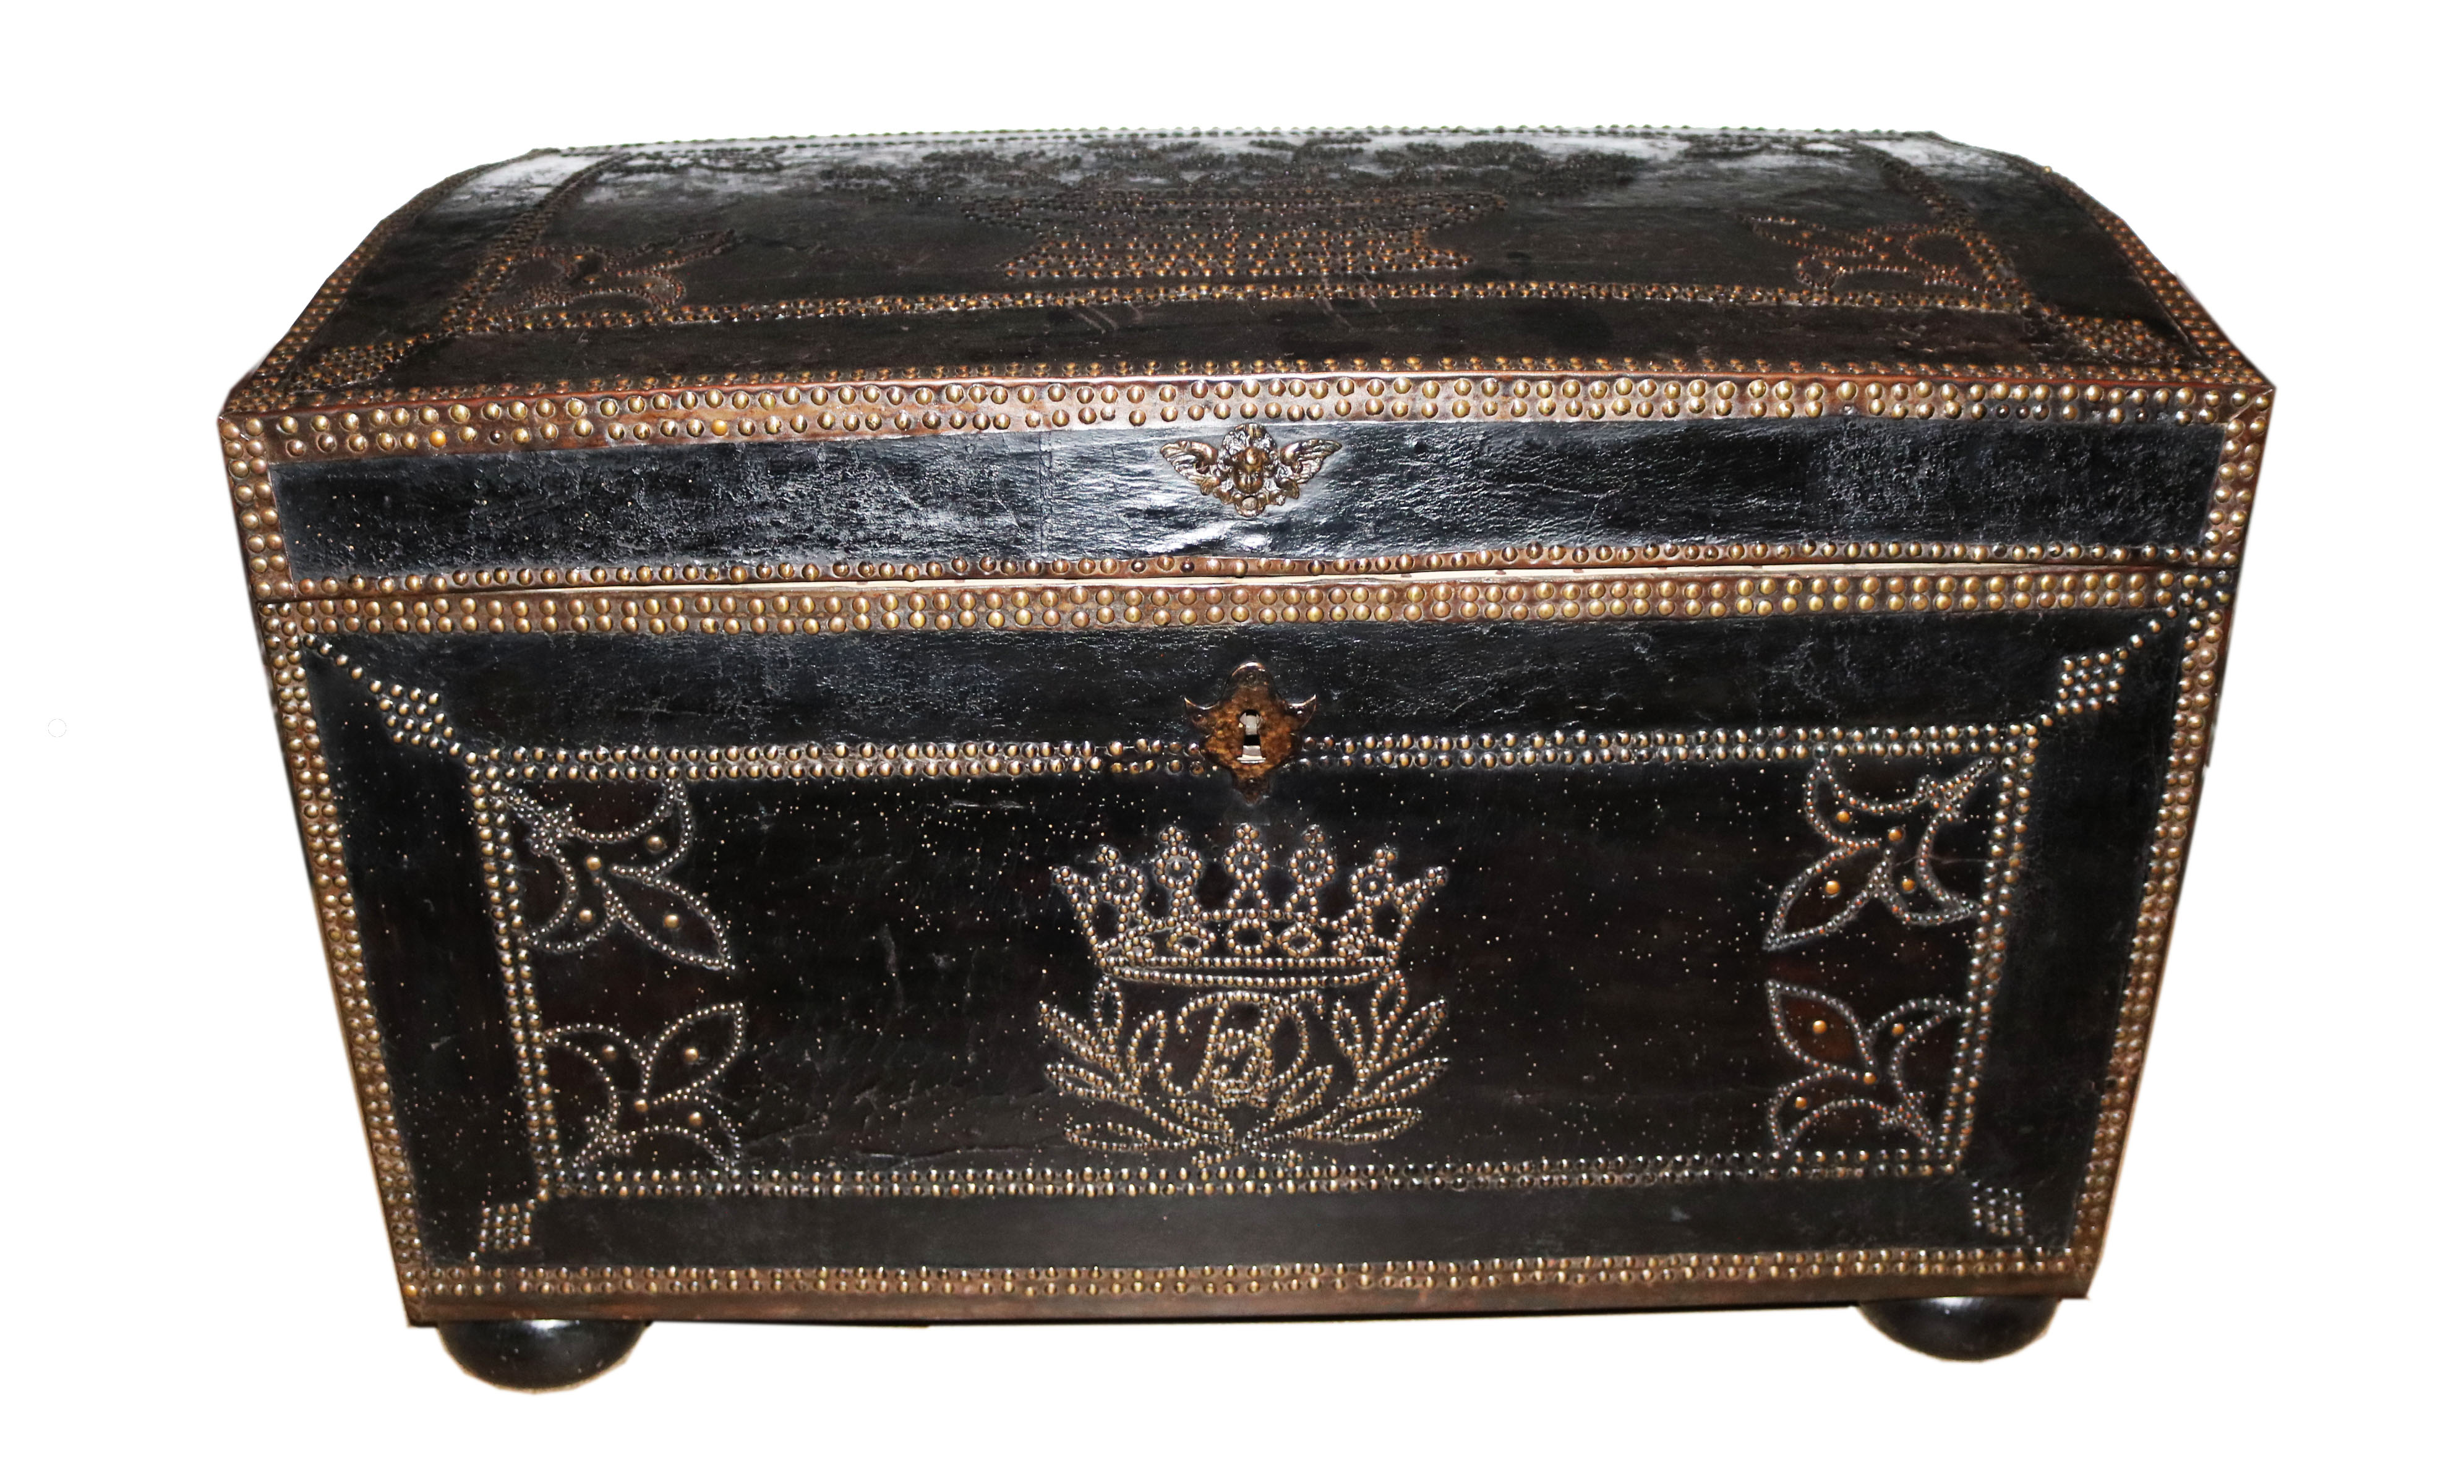 A Sizable 18th Century English Leather Bound Trunk No. 4762